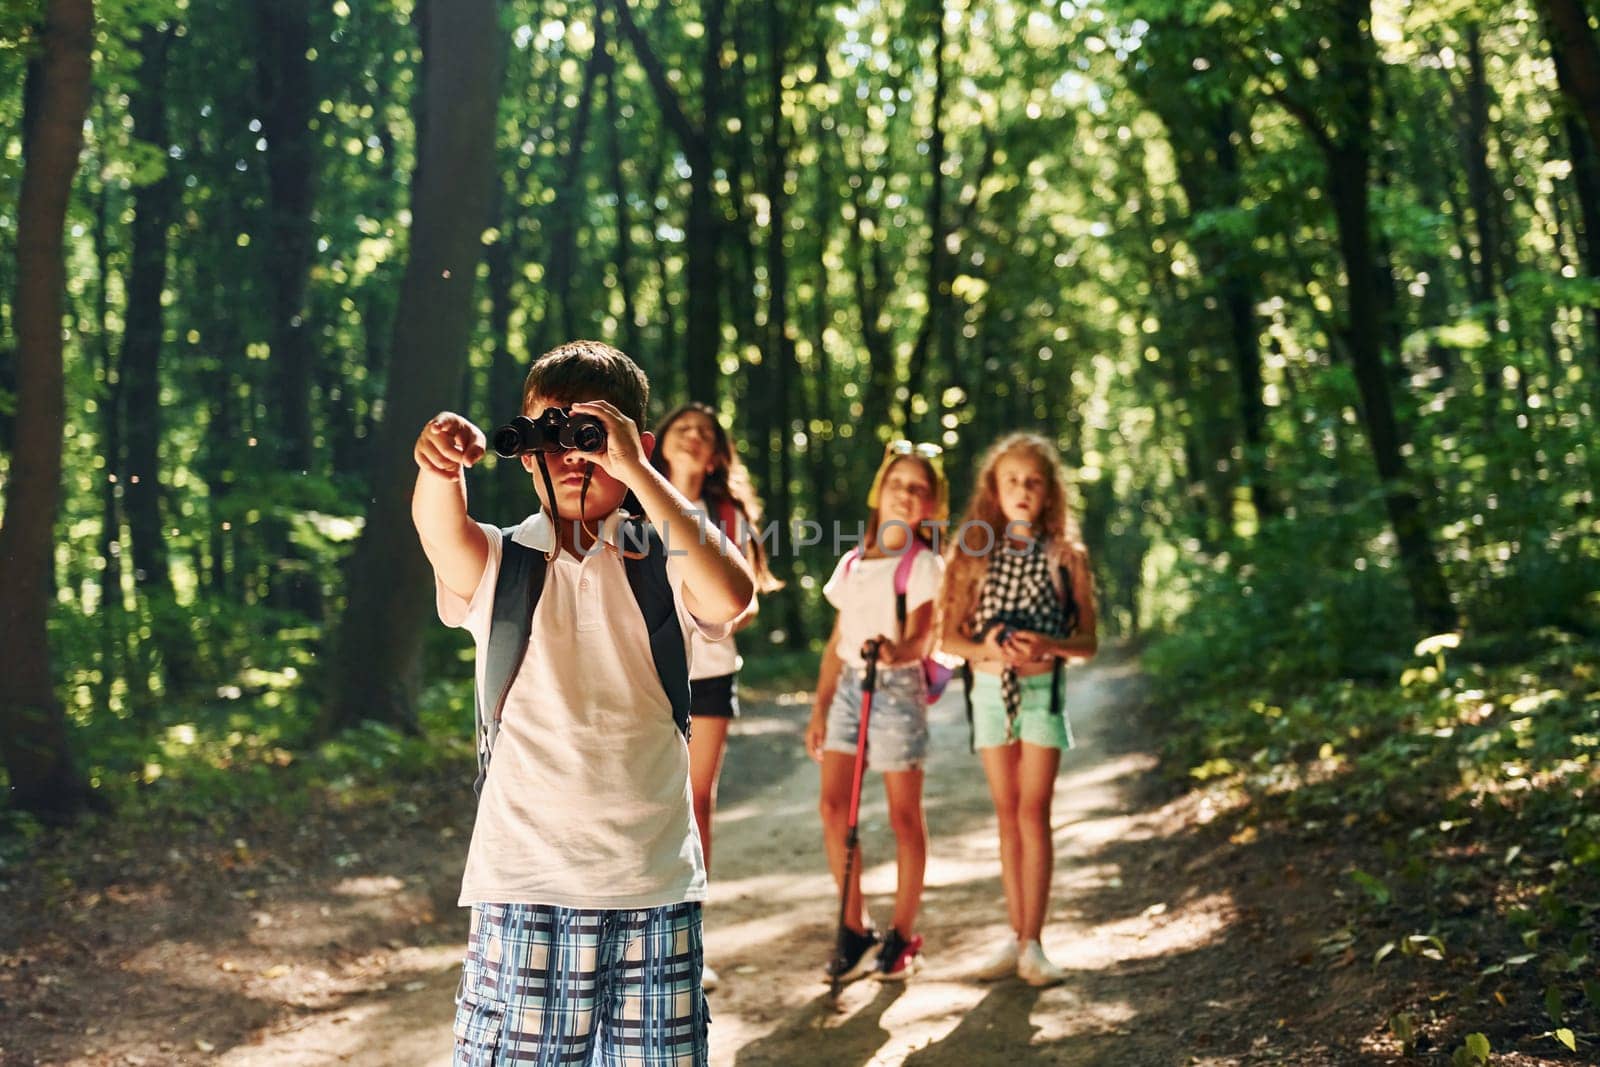 Beautiful nature. Kids strolling in the forest with travel equipment.